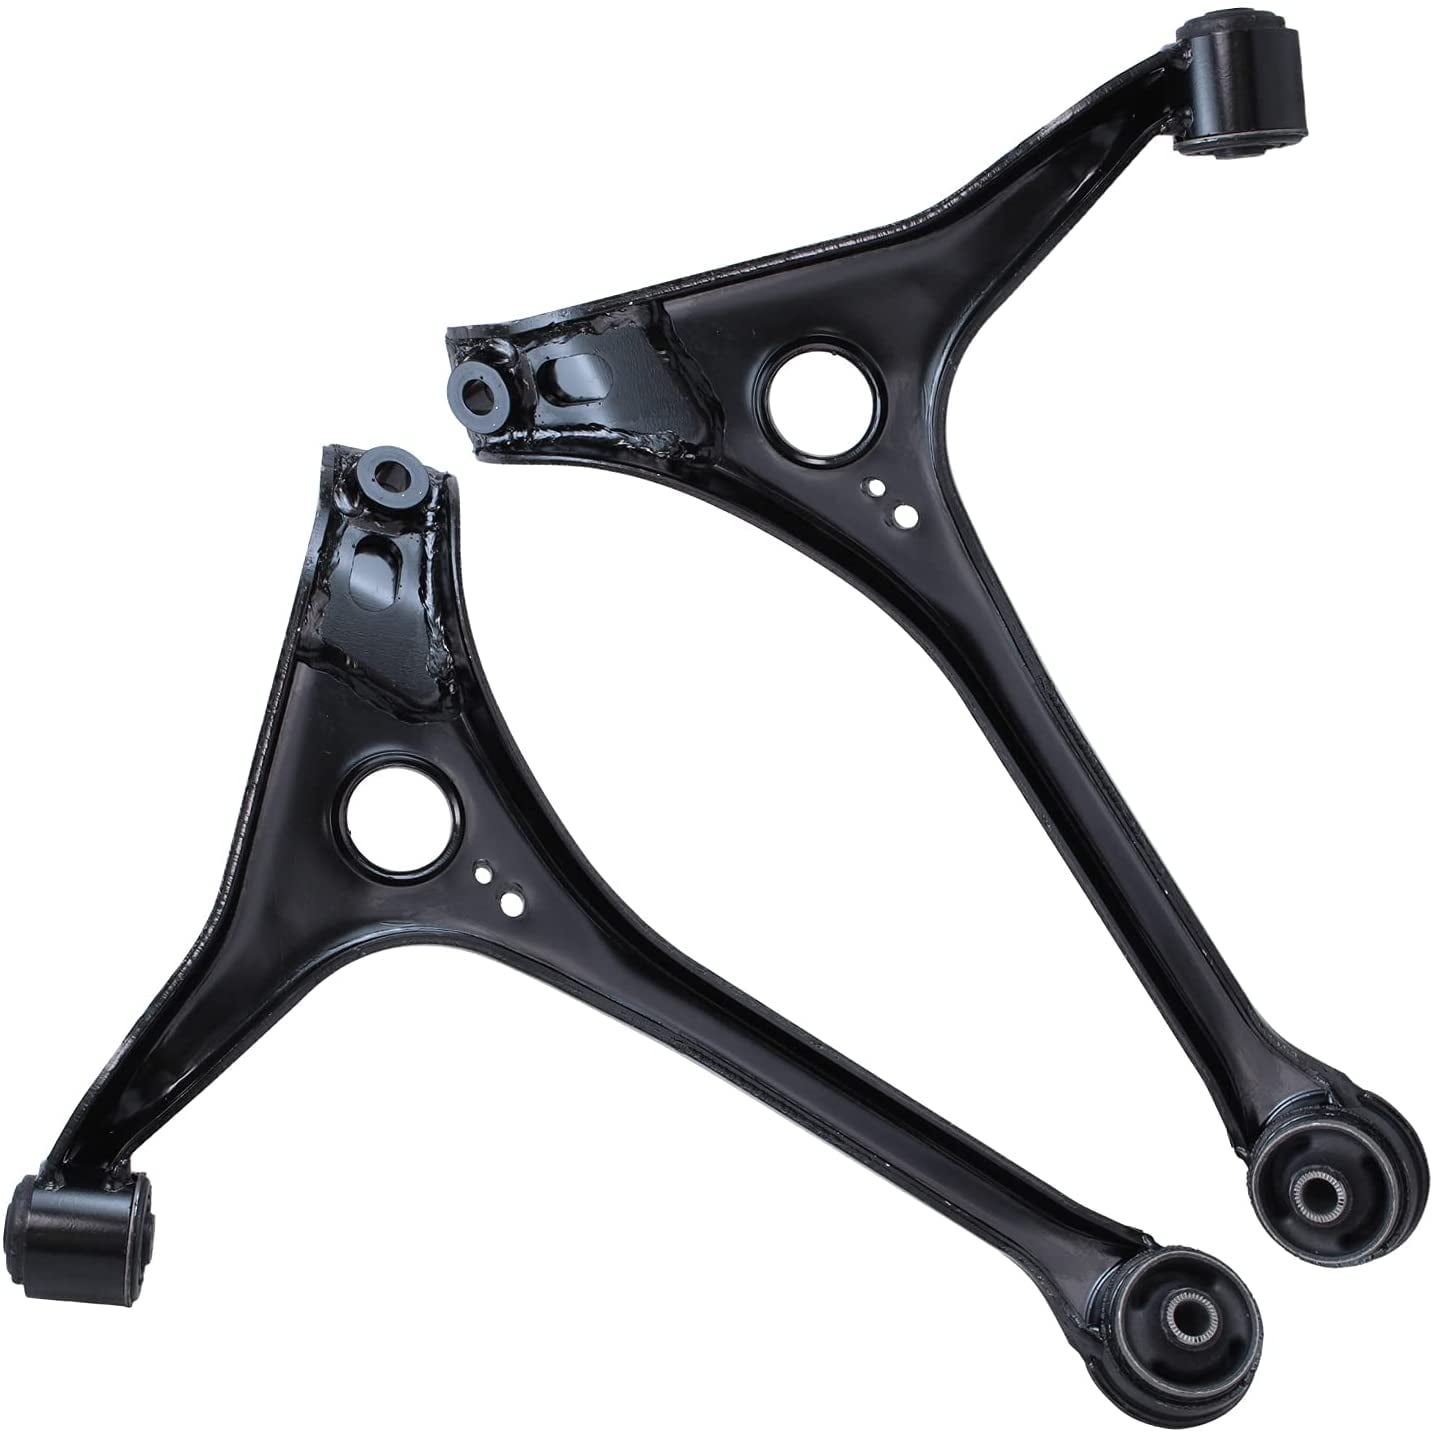 Detroit Axle - 2pc Front Control Arms for 1998-2007 Ford Taurus, 98-05  Mercury Sable, 2 Lower Control Arms 1998 1999 2000 2001 2002 2003 2004 2005 